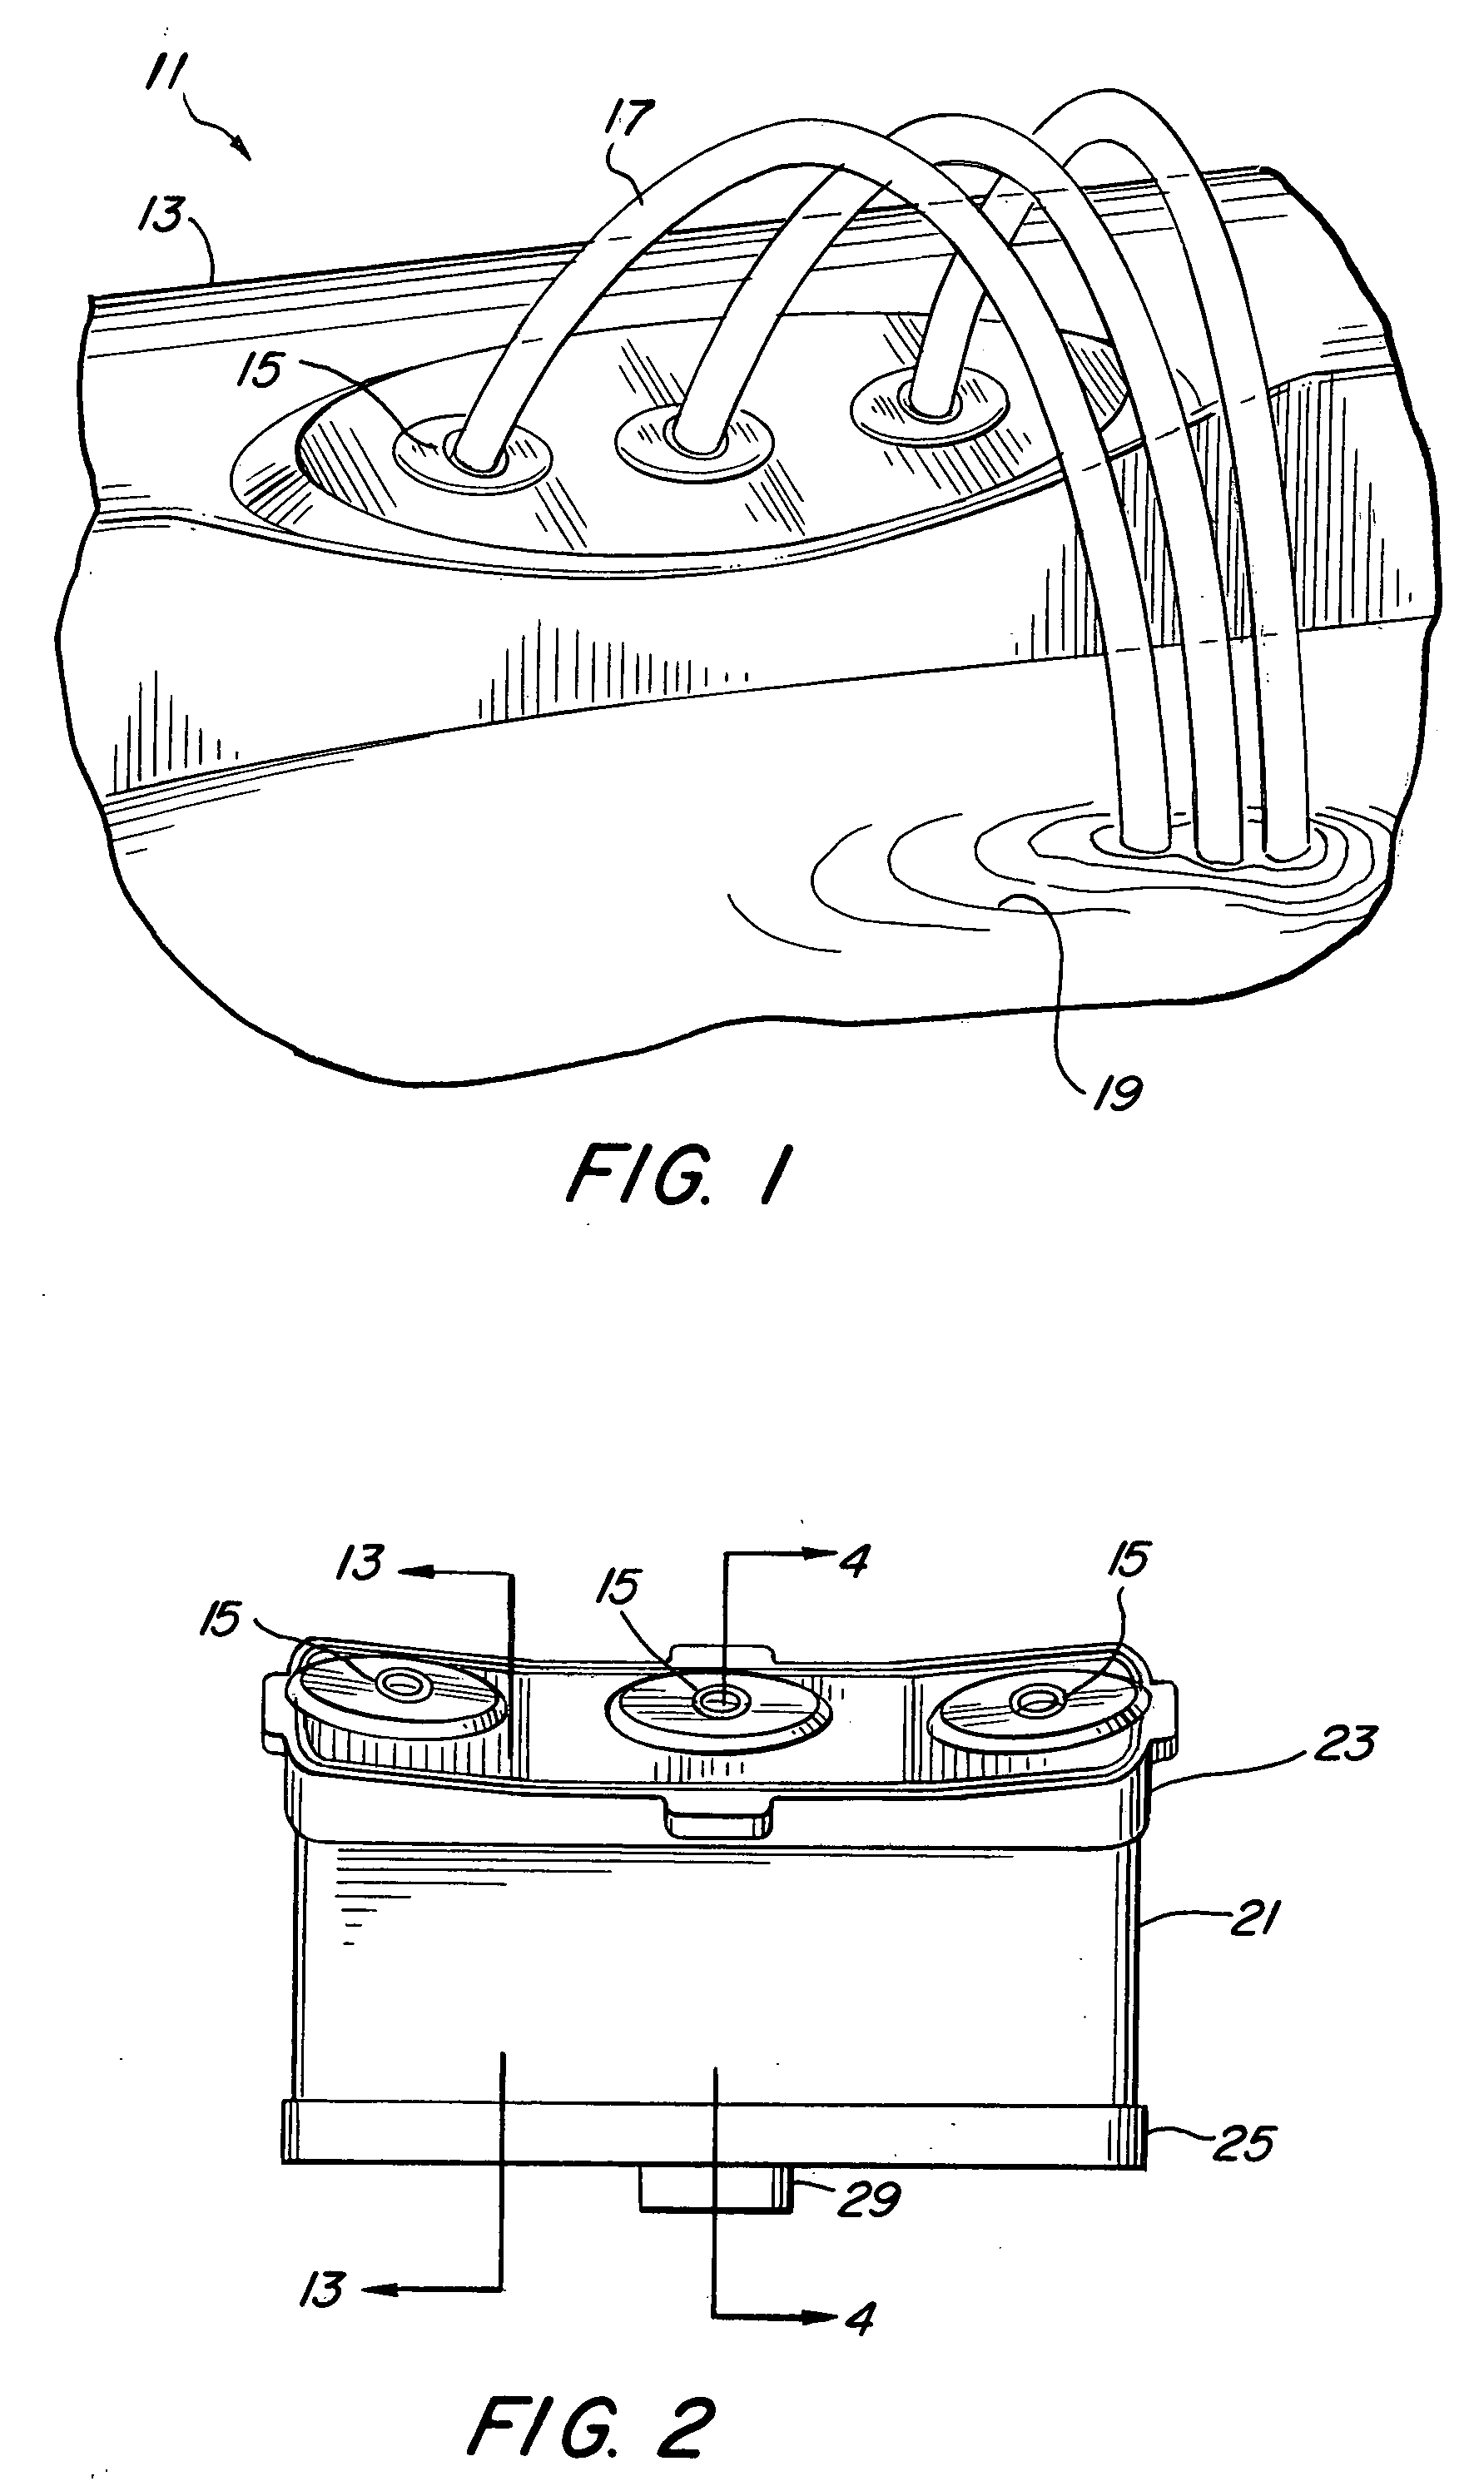 Laminar flow lighted waterfall apparatus for spa